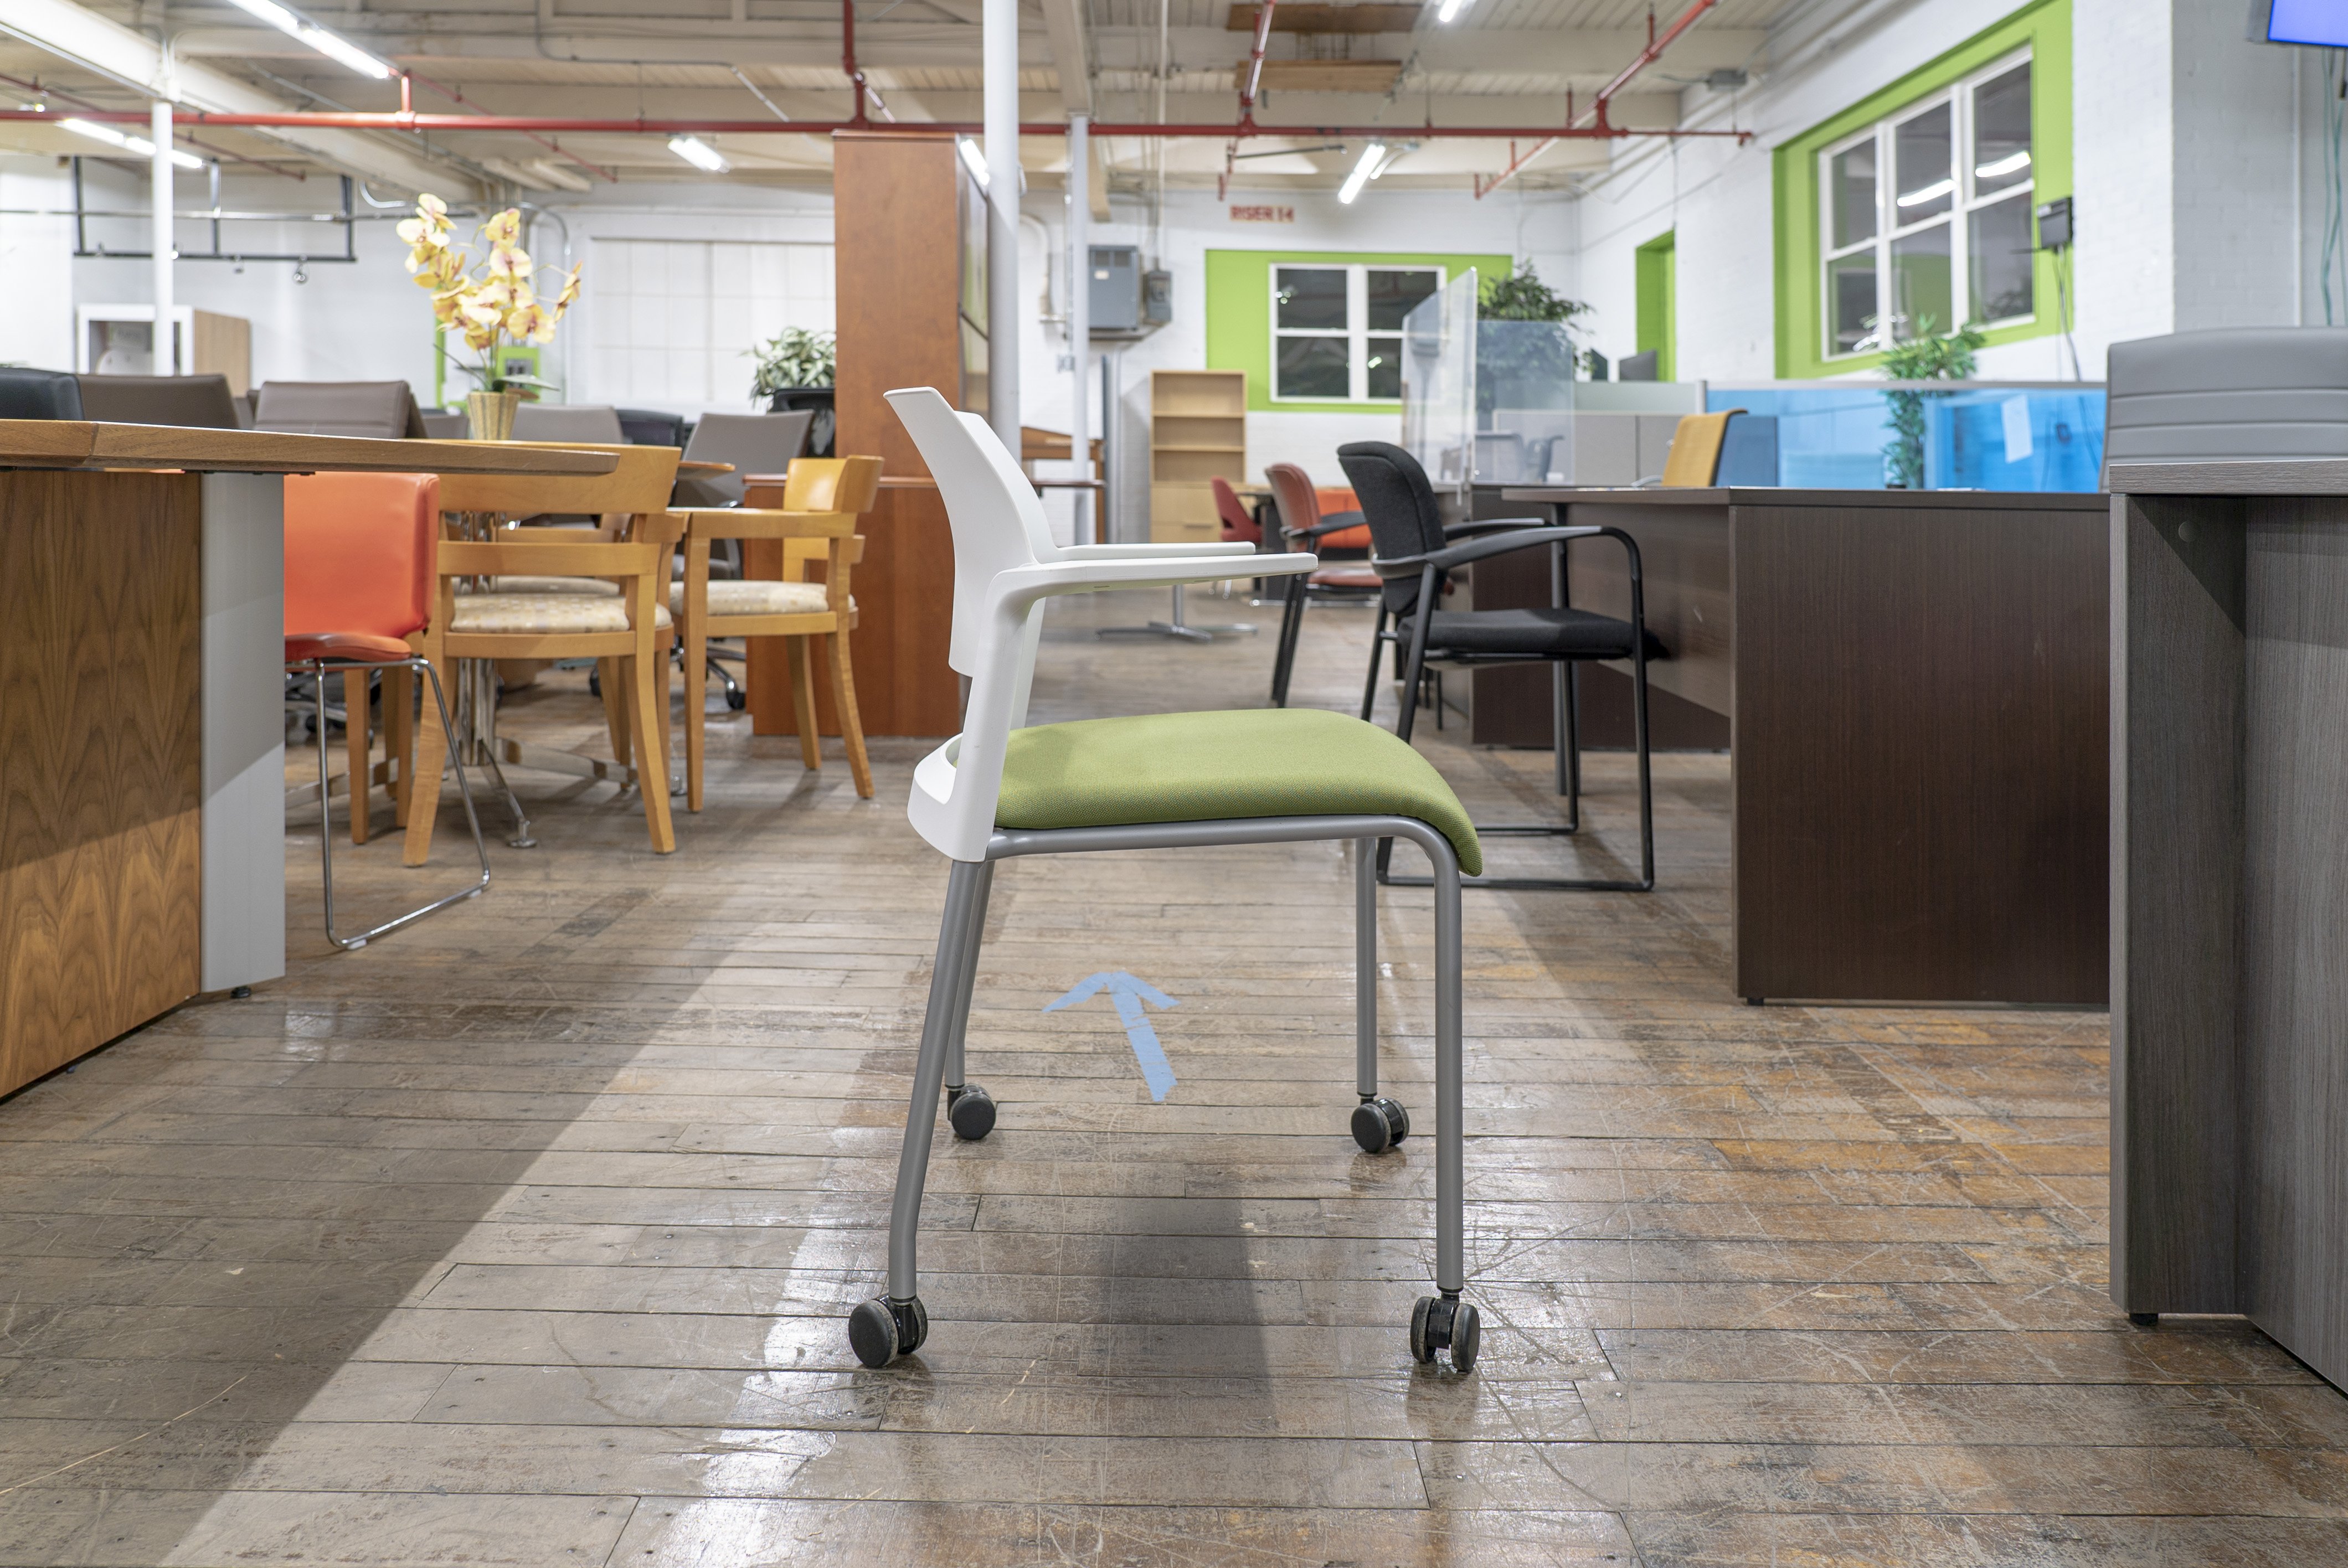 steelcase-move-mobile-stack-chairs